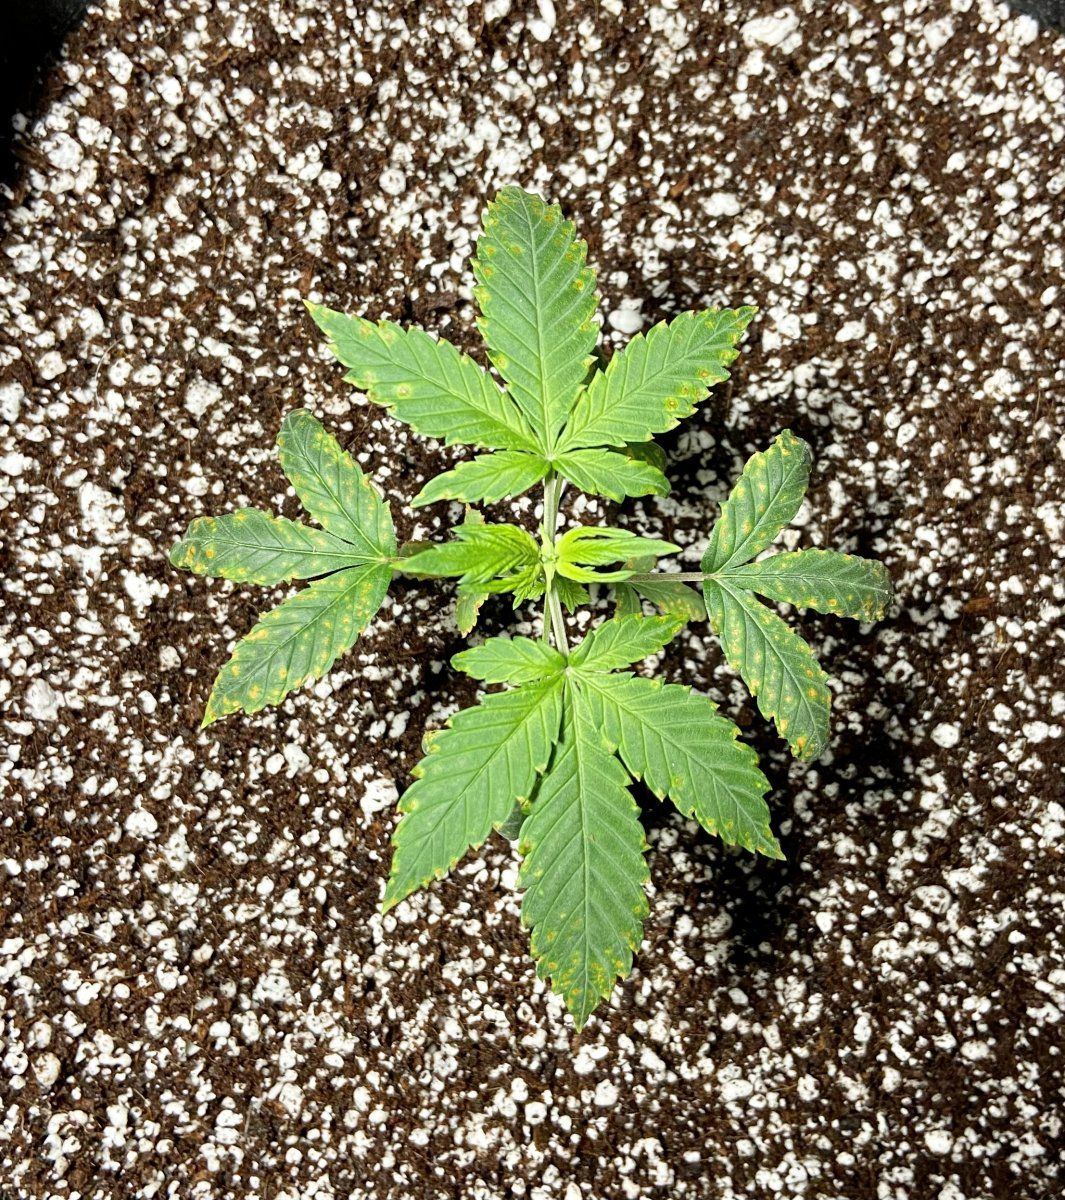 Please help with small dark spots 3